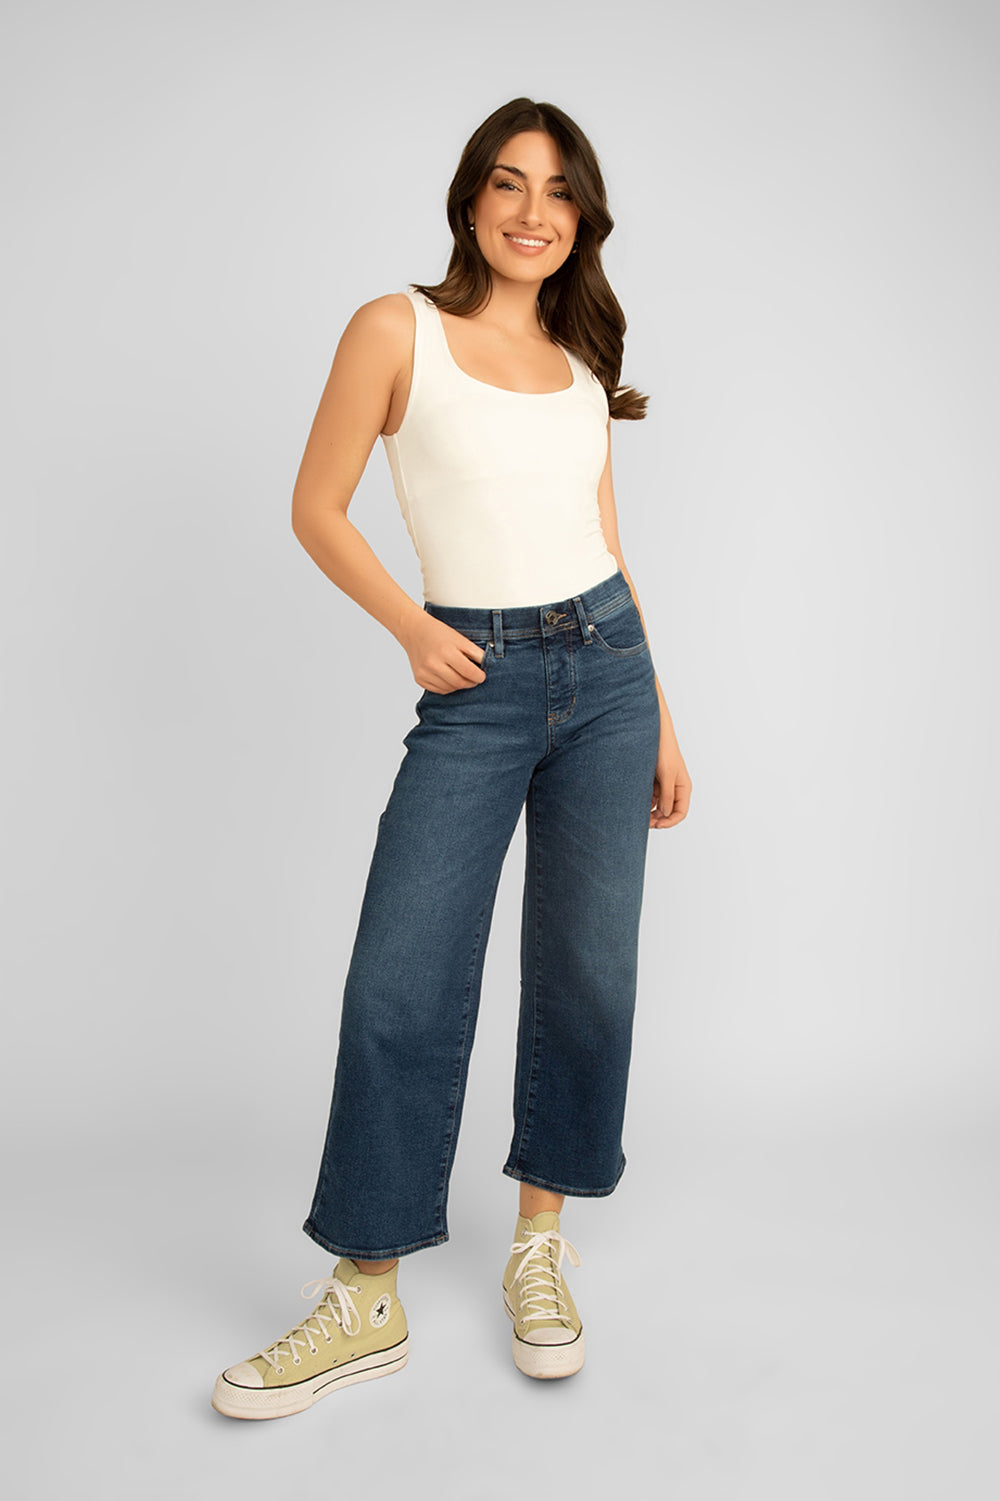 JAG - Jag Carter Mid Rise Girlfriend Jeans - Women's Clothing & Accessories 